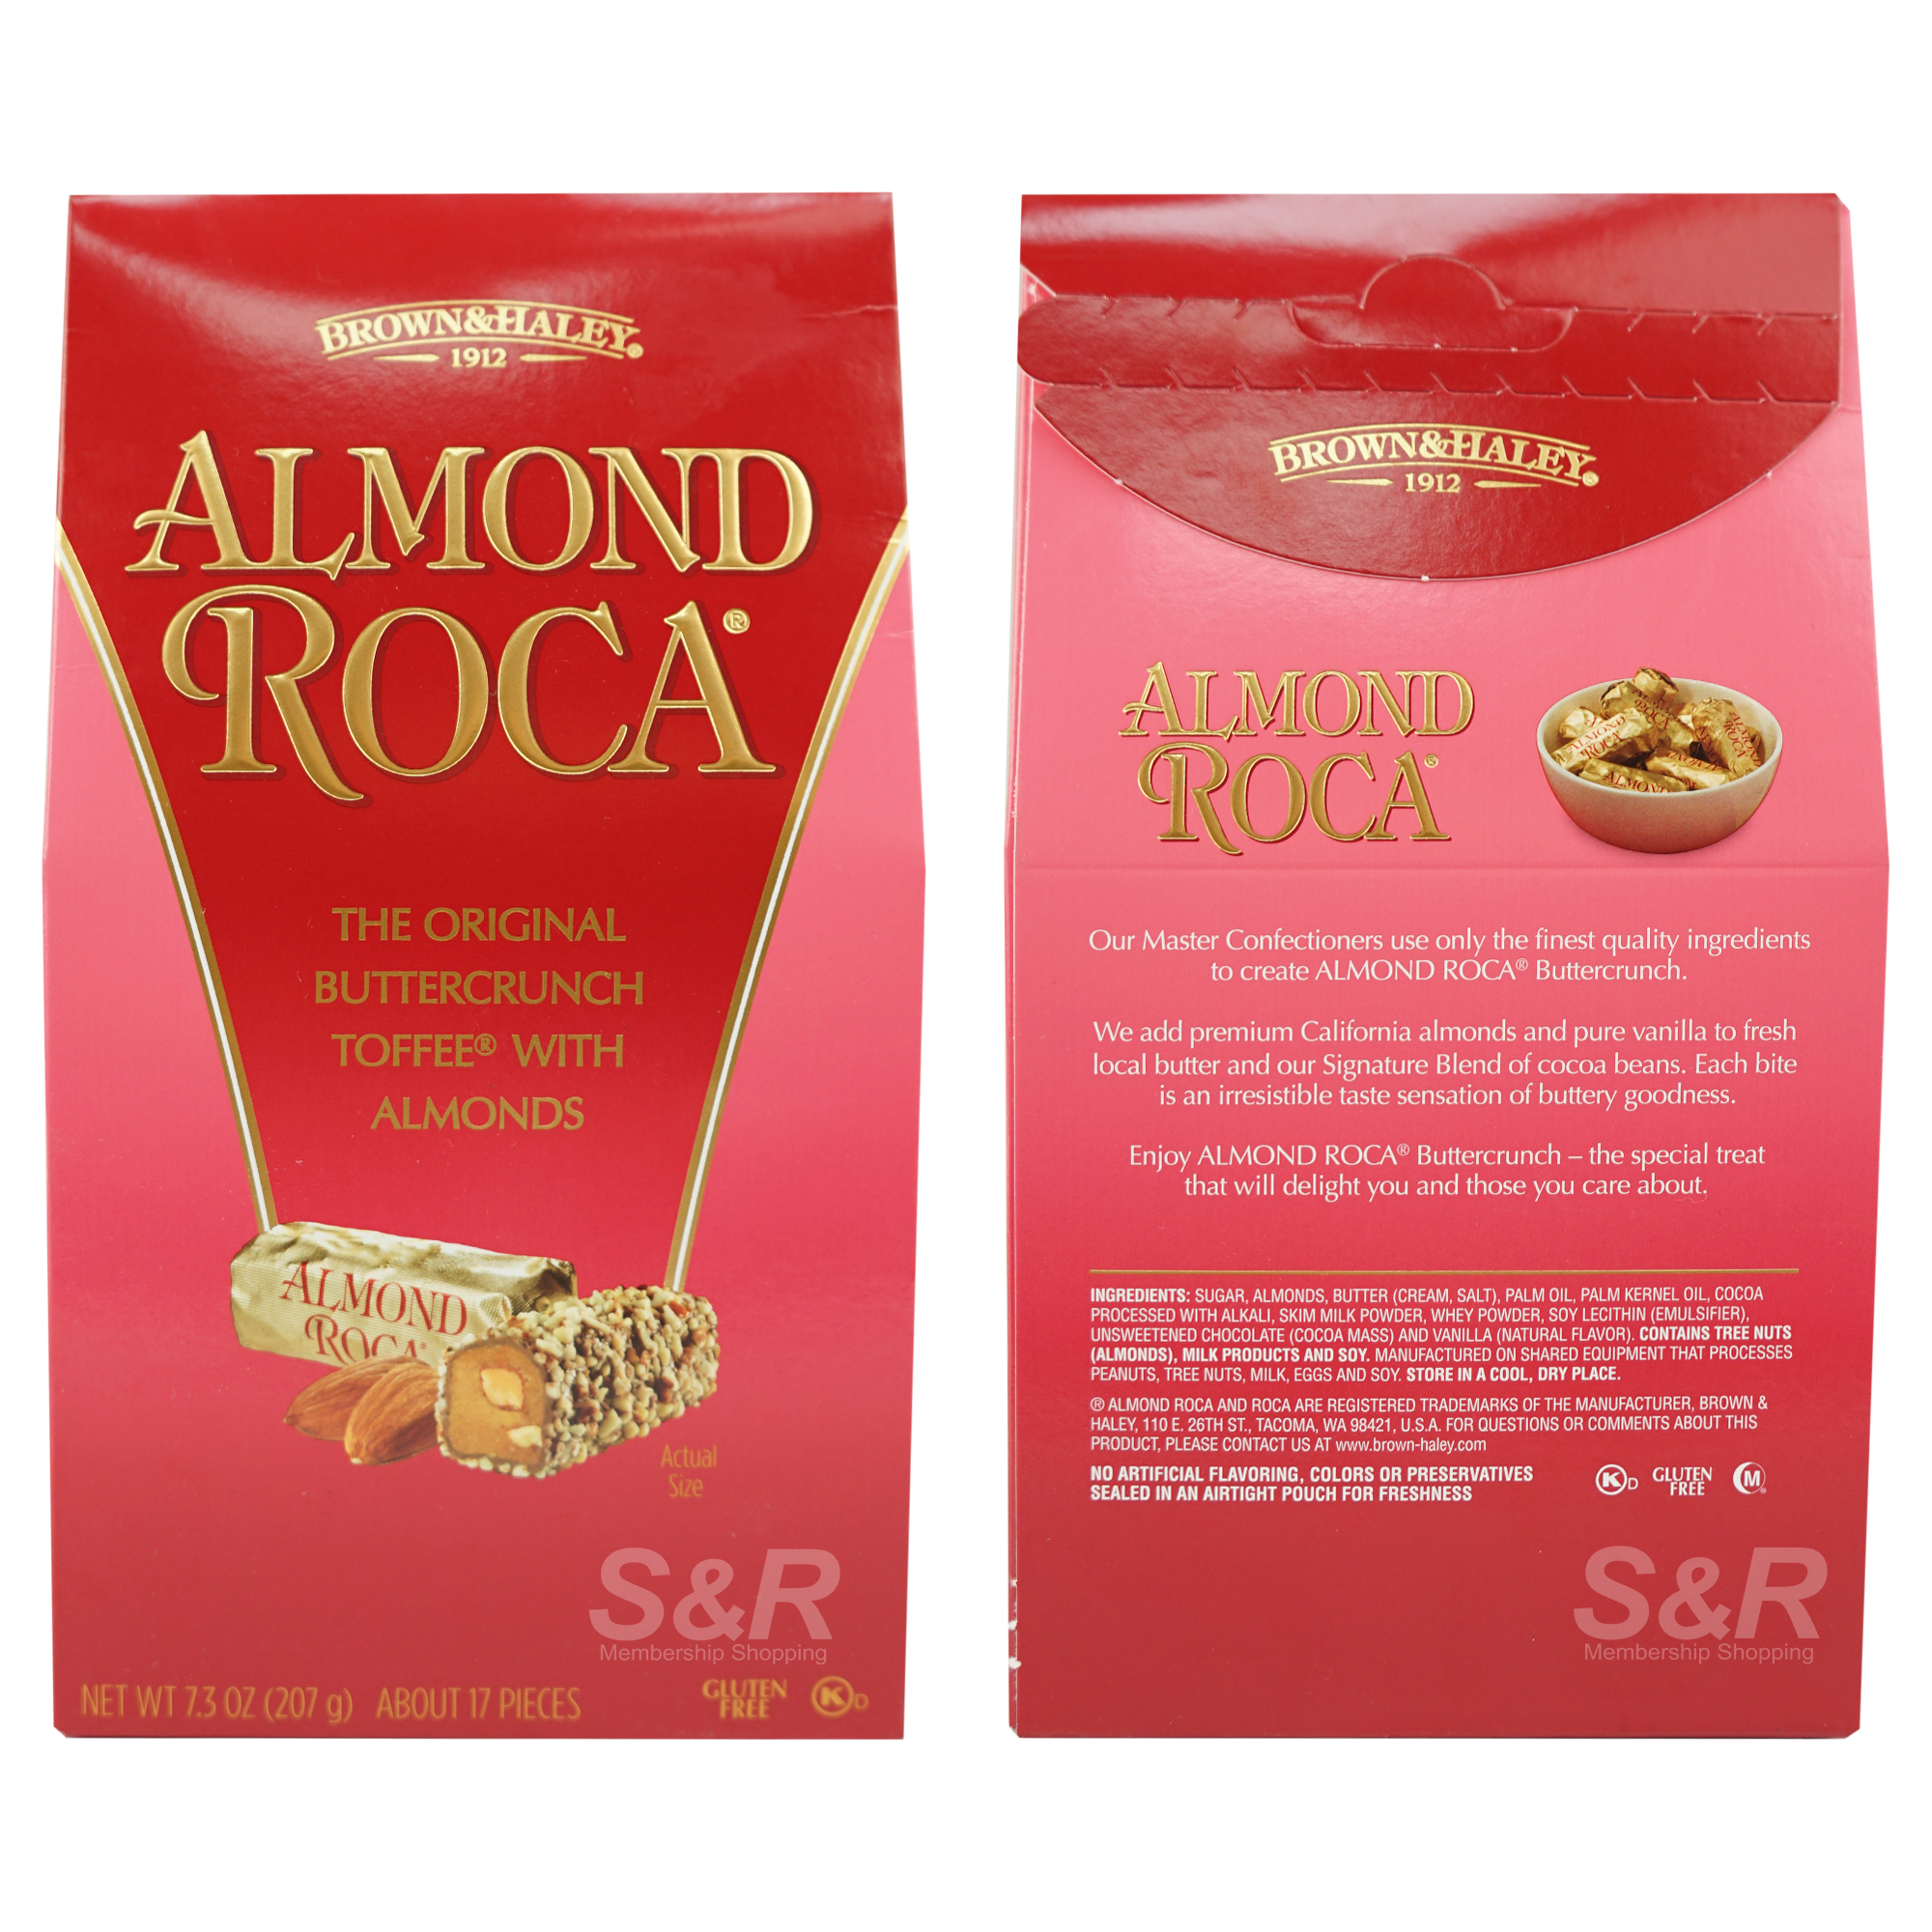 Almond Roca The Original Buttercrunch Toffee with Almonds